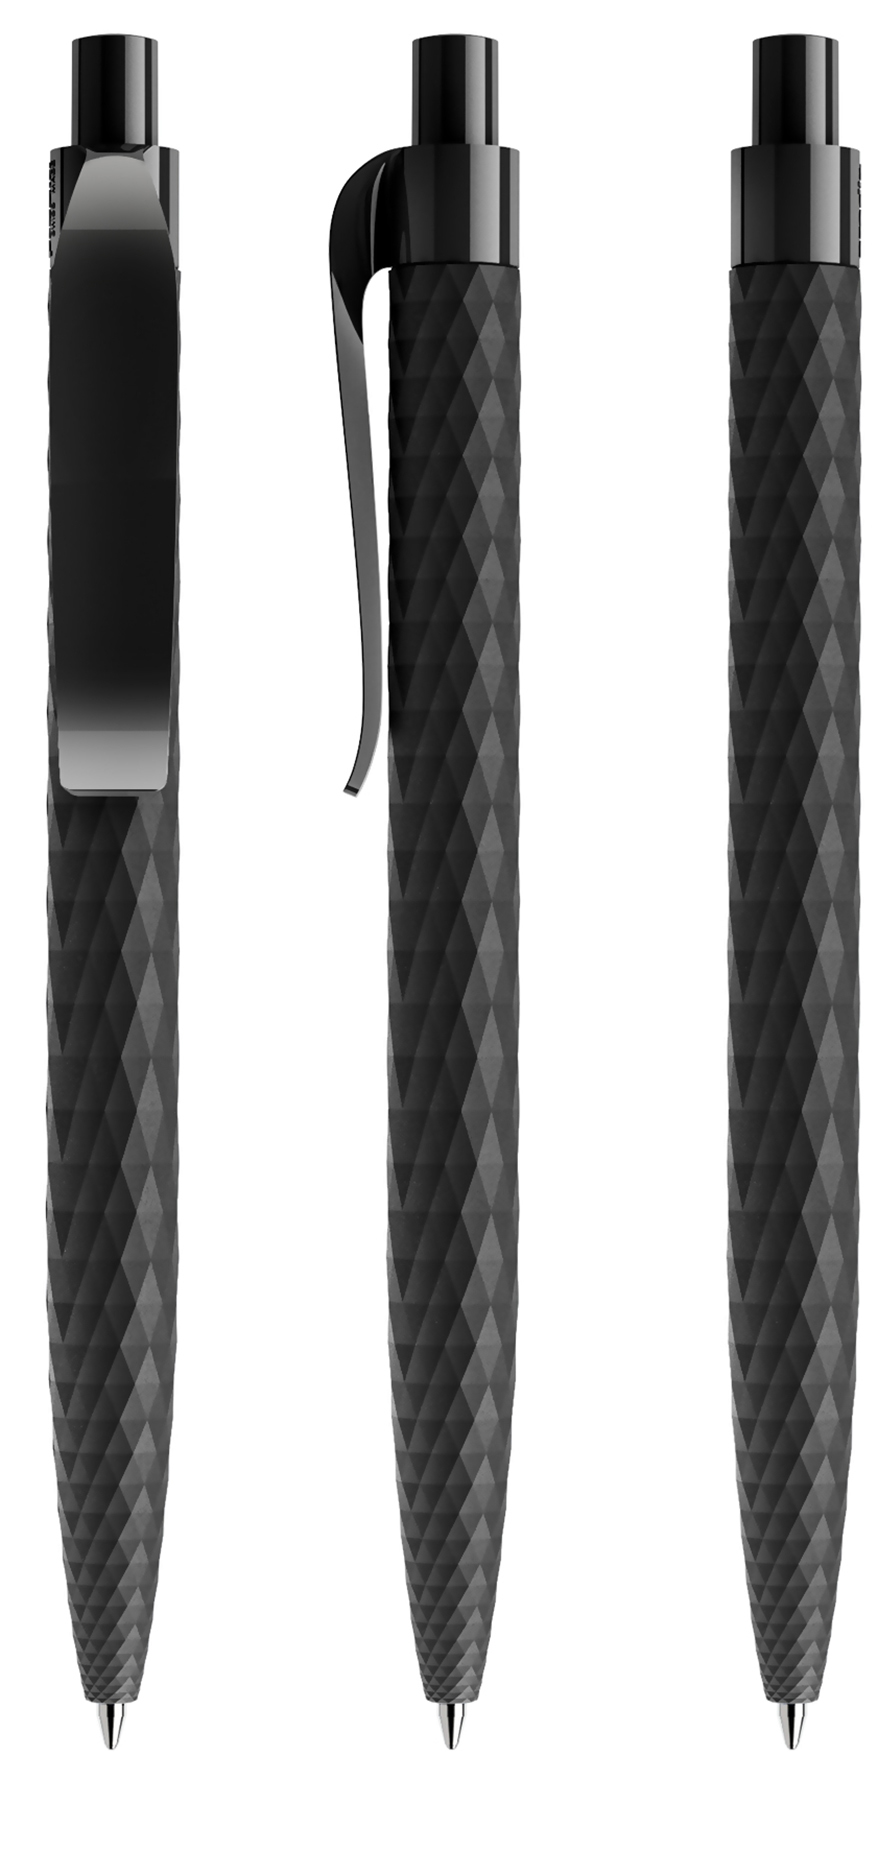 QS01 Touch patterned pen in black